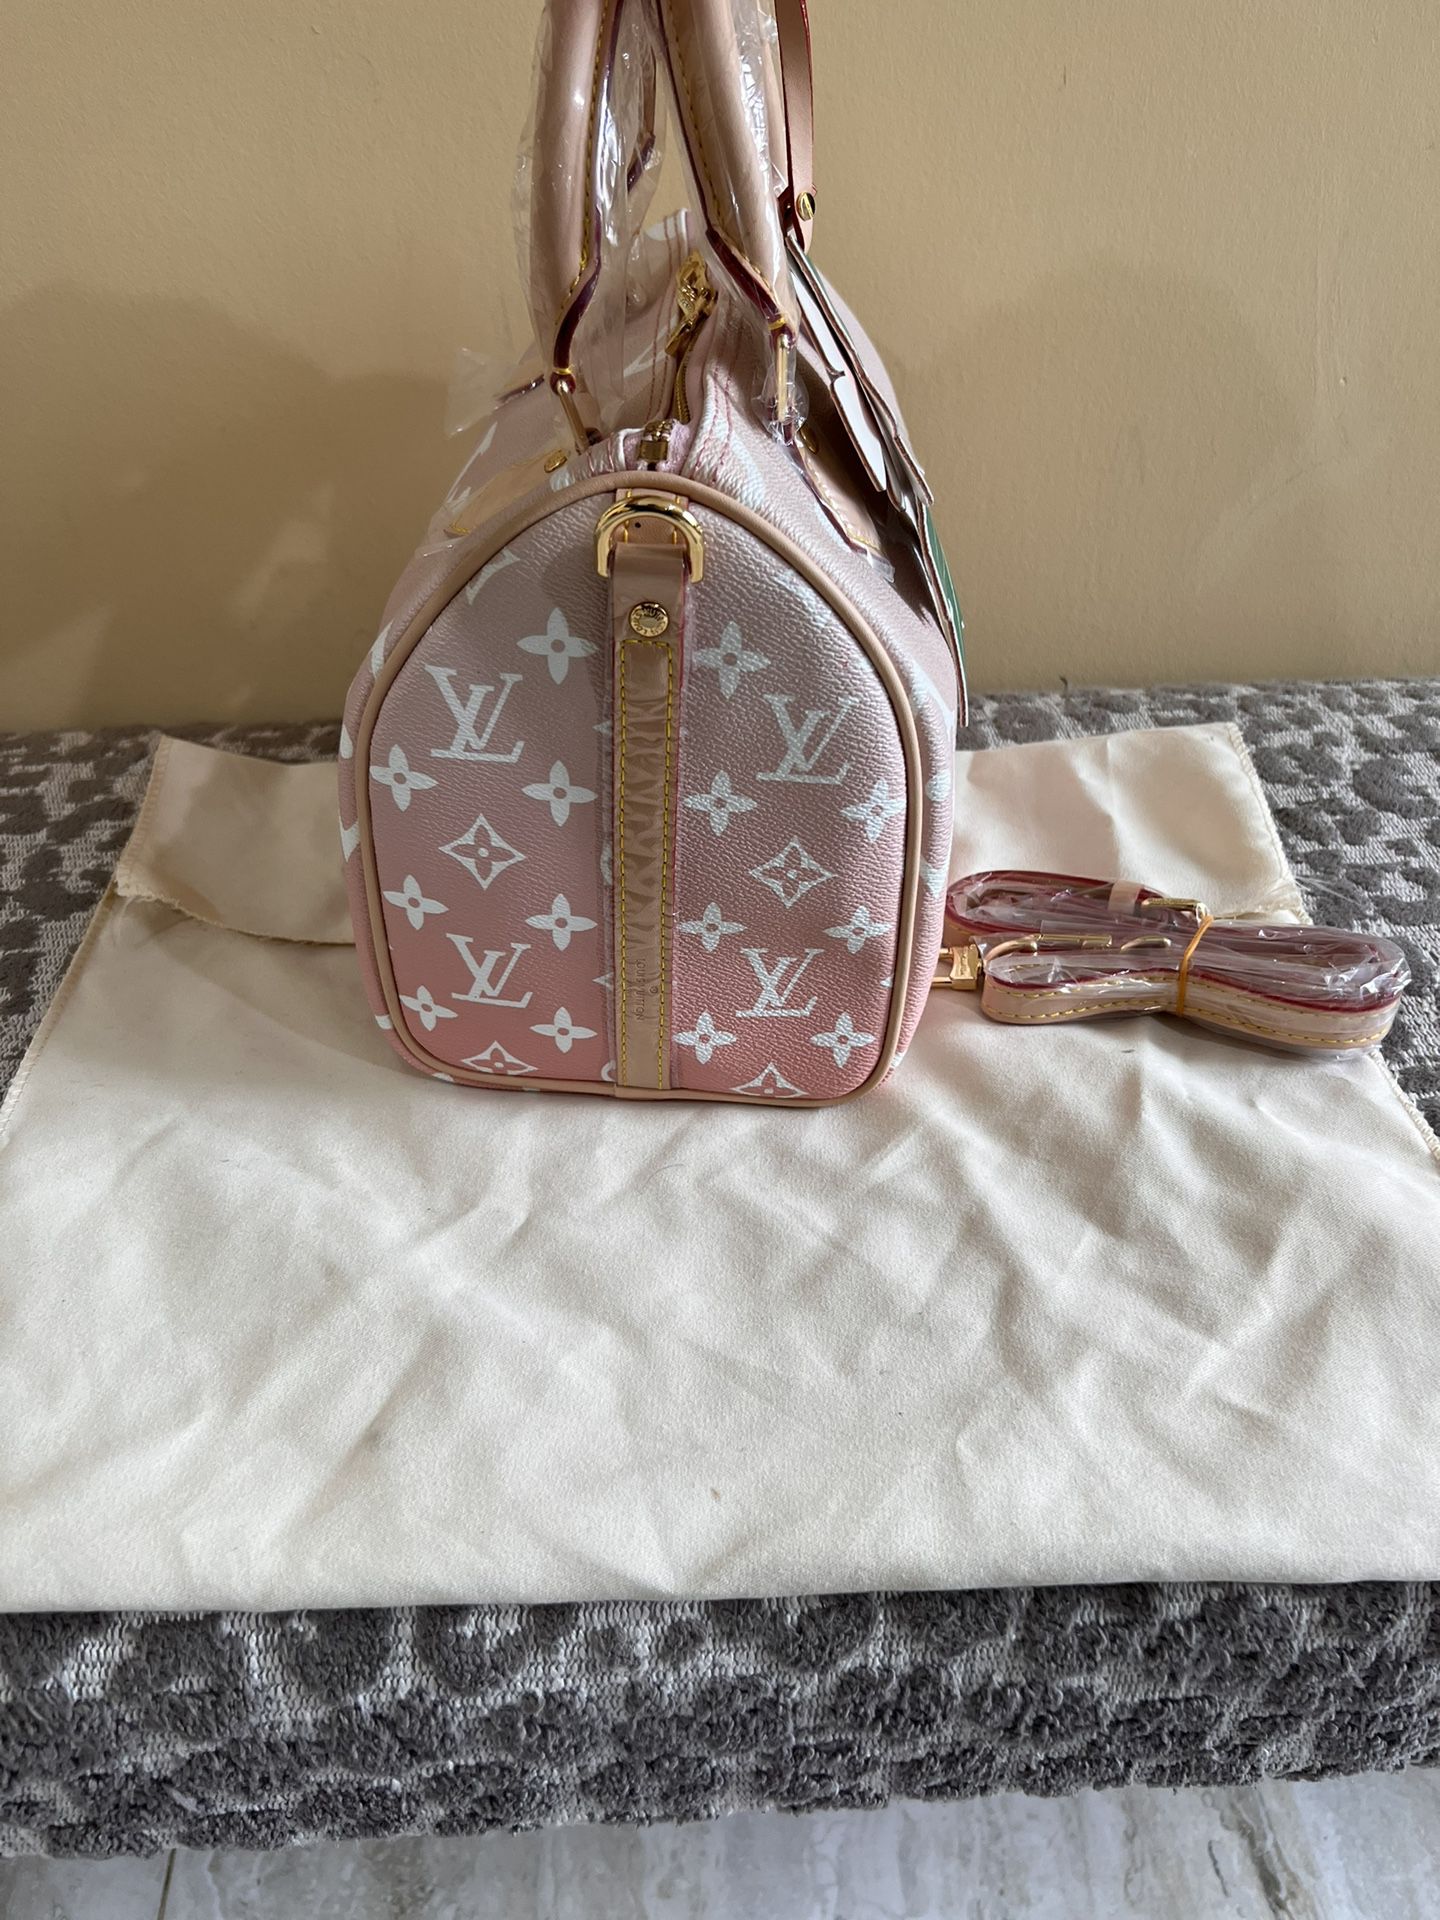 Woman Bag for Sale in Huntingtn Sta, NY - OfferUp